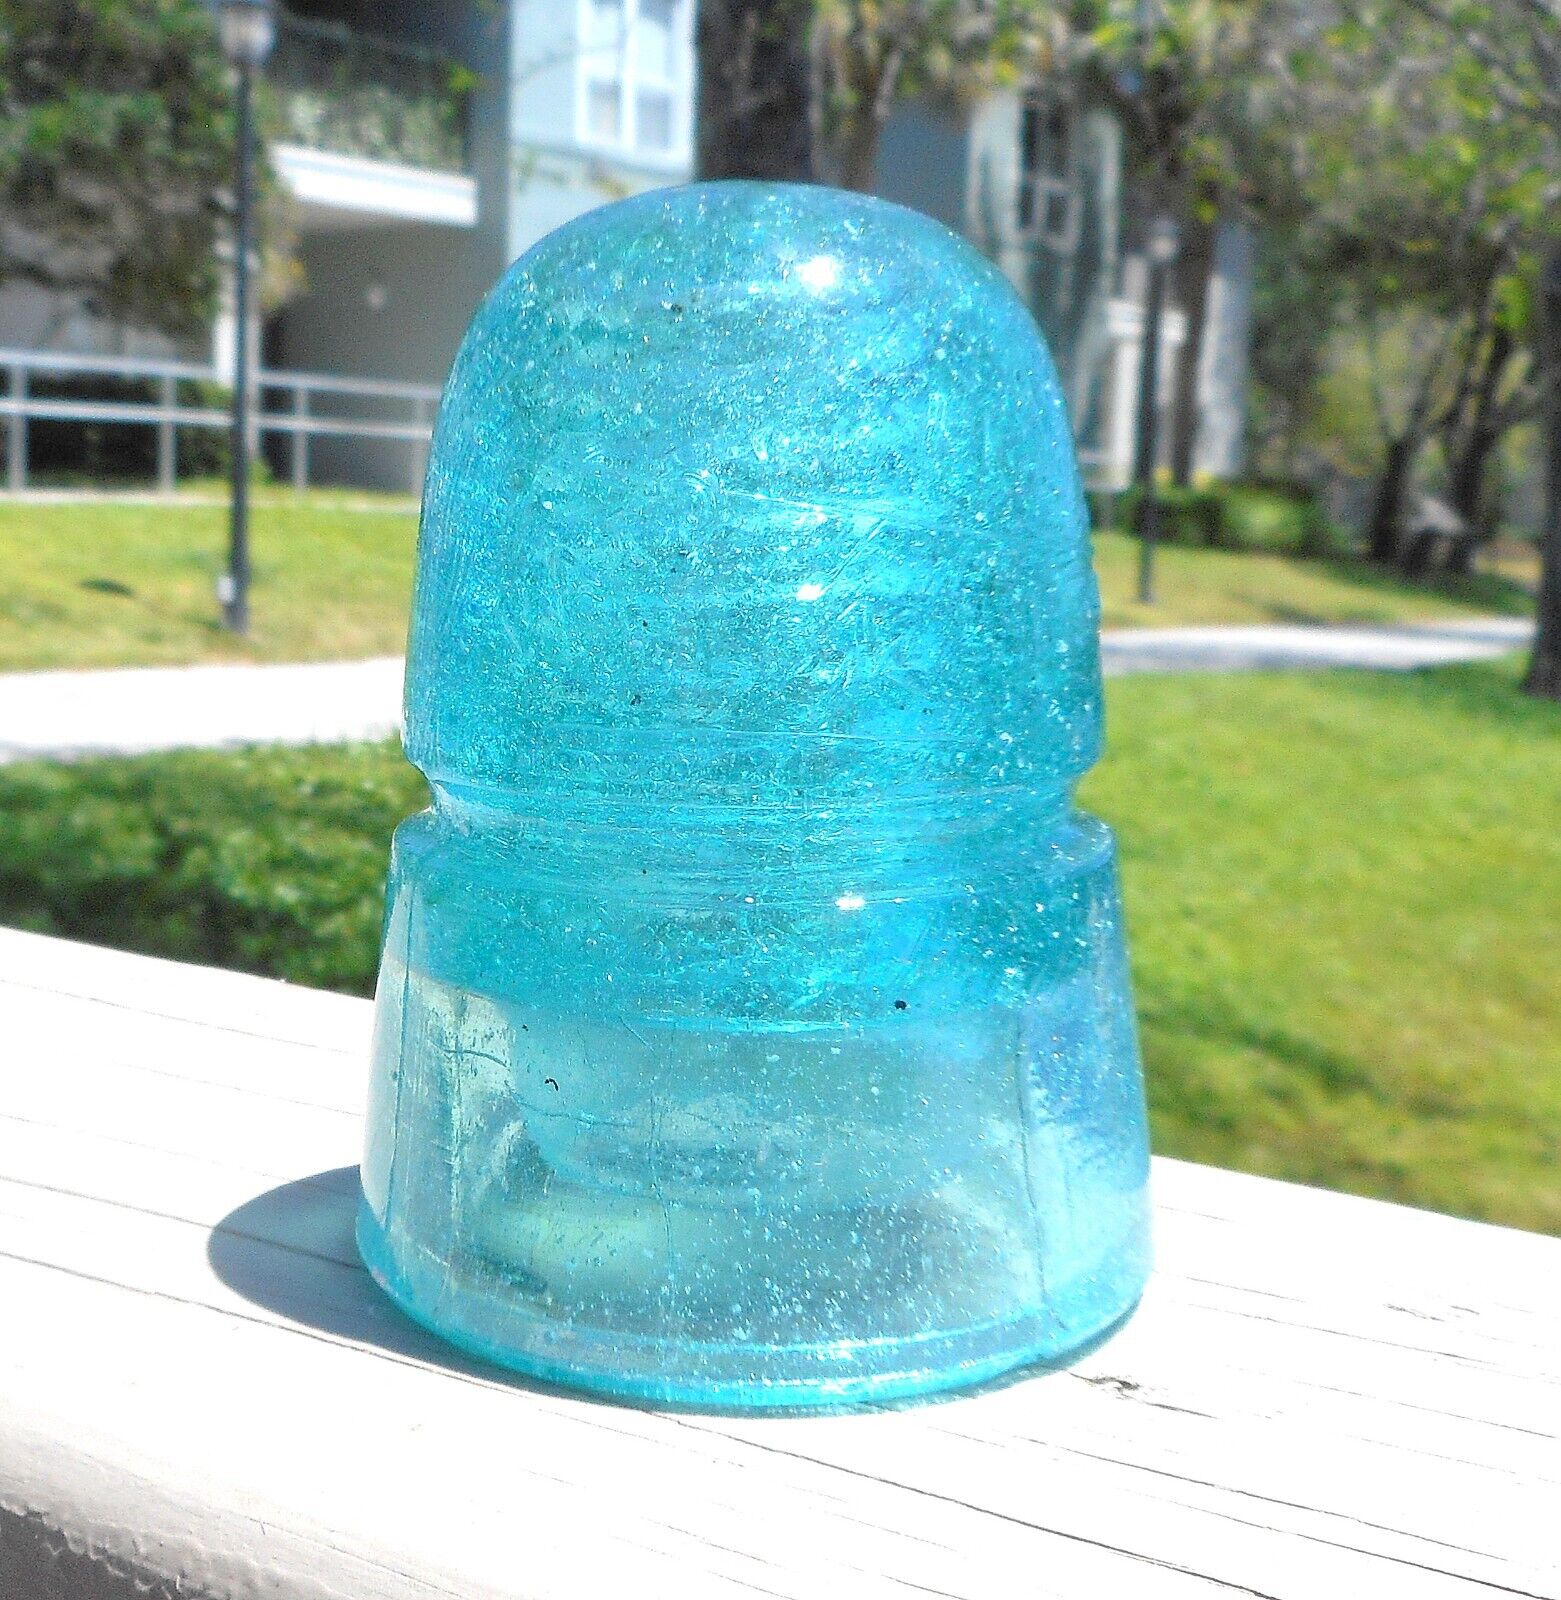 GREAT HEAVY BUBBLY SNOW CD 145 BROOKFIELD BEEHIVE STYLE GLASS INSULATOR